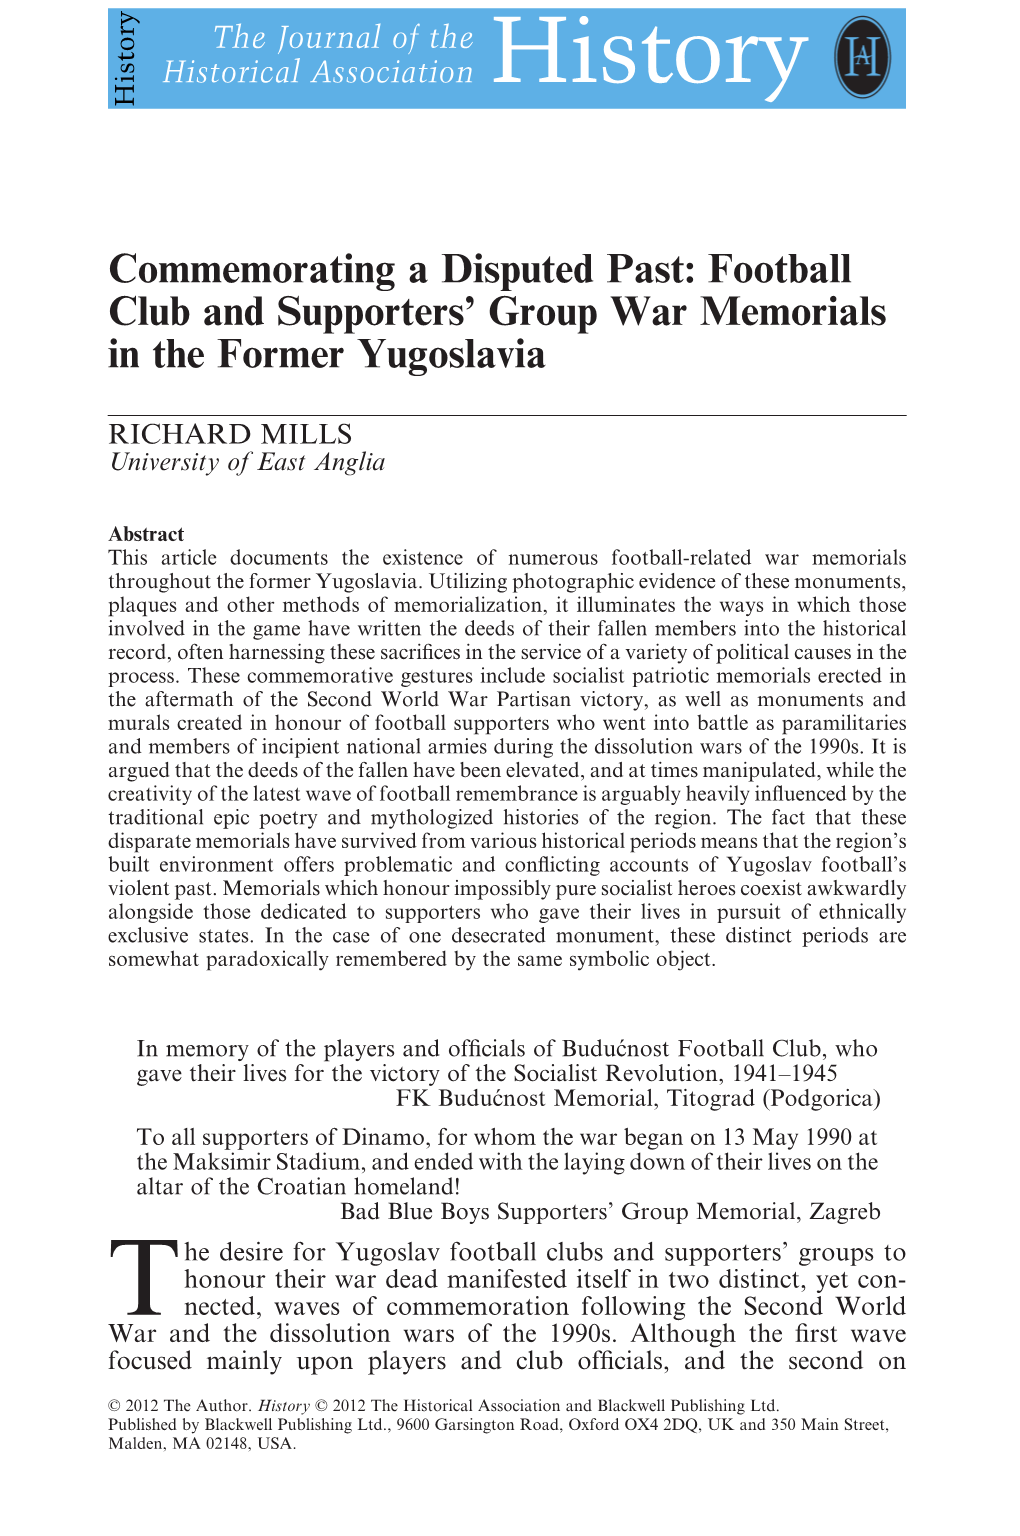 Football Club and Supporters' Group War Memorials in The